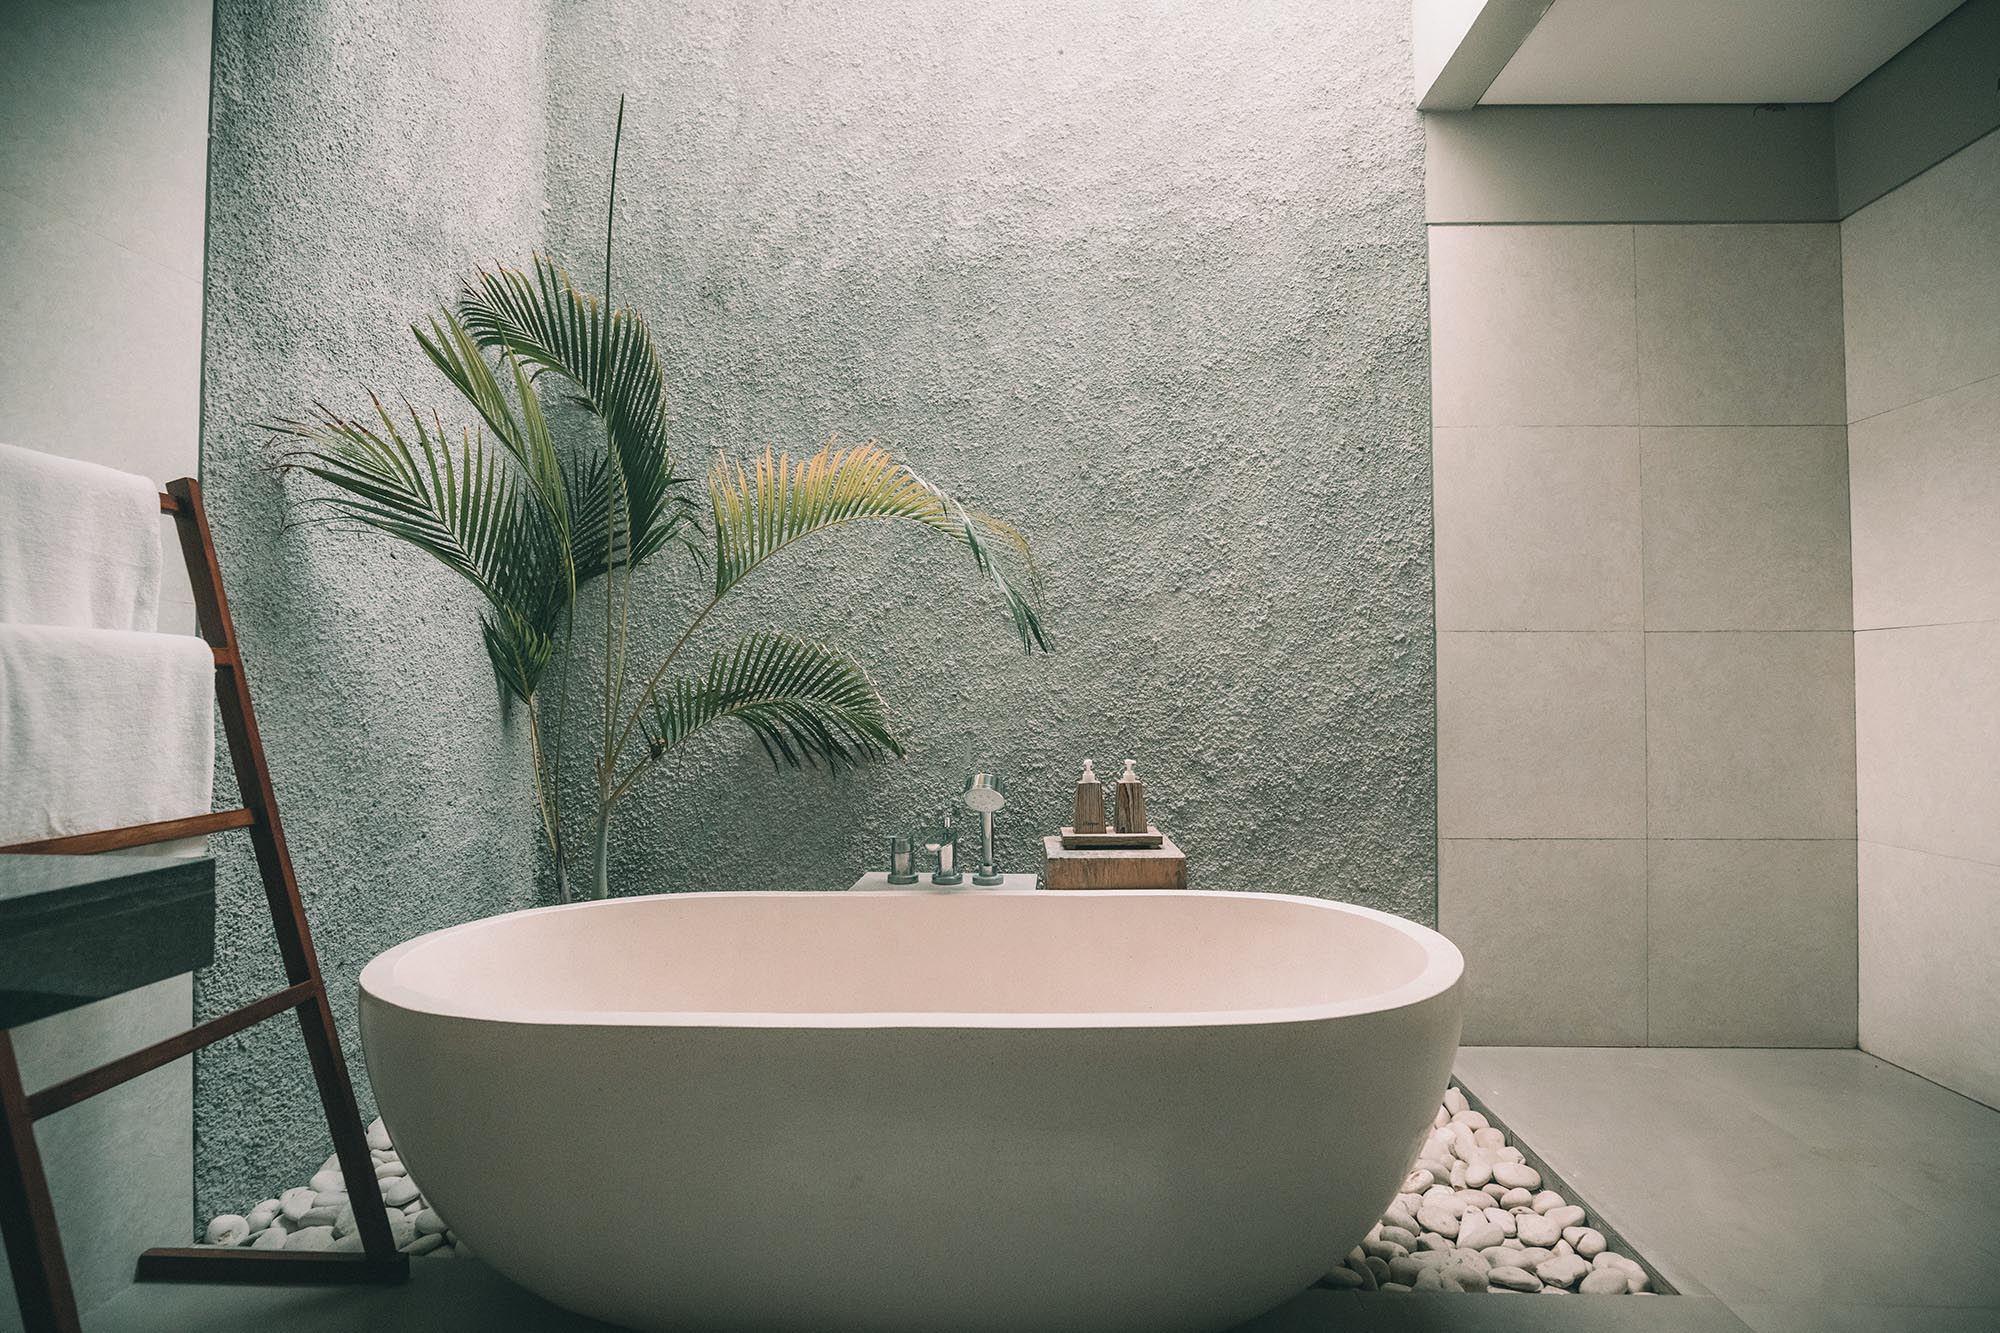 The Top Five Ways You Can Have a Cozier, More Relaxing Bathroom Ambiance